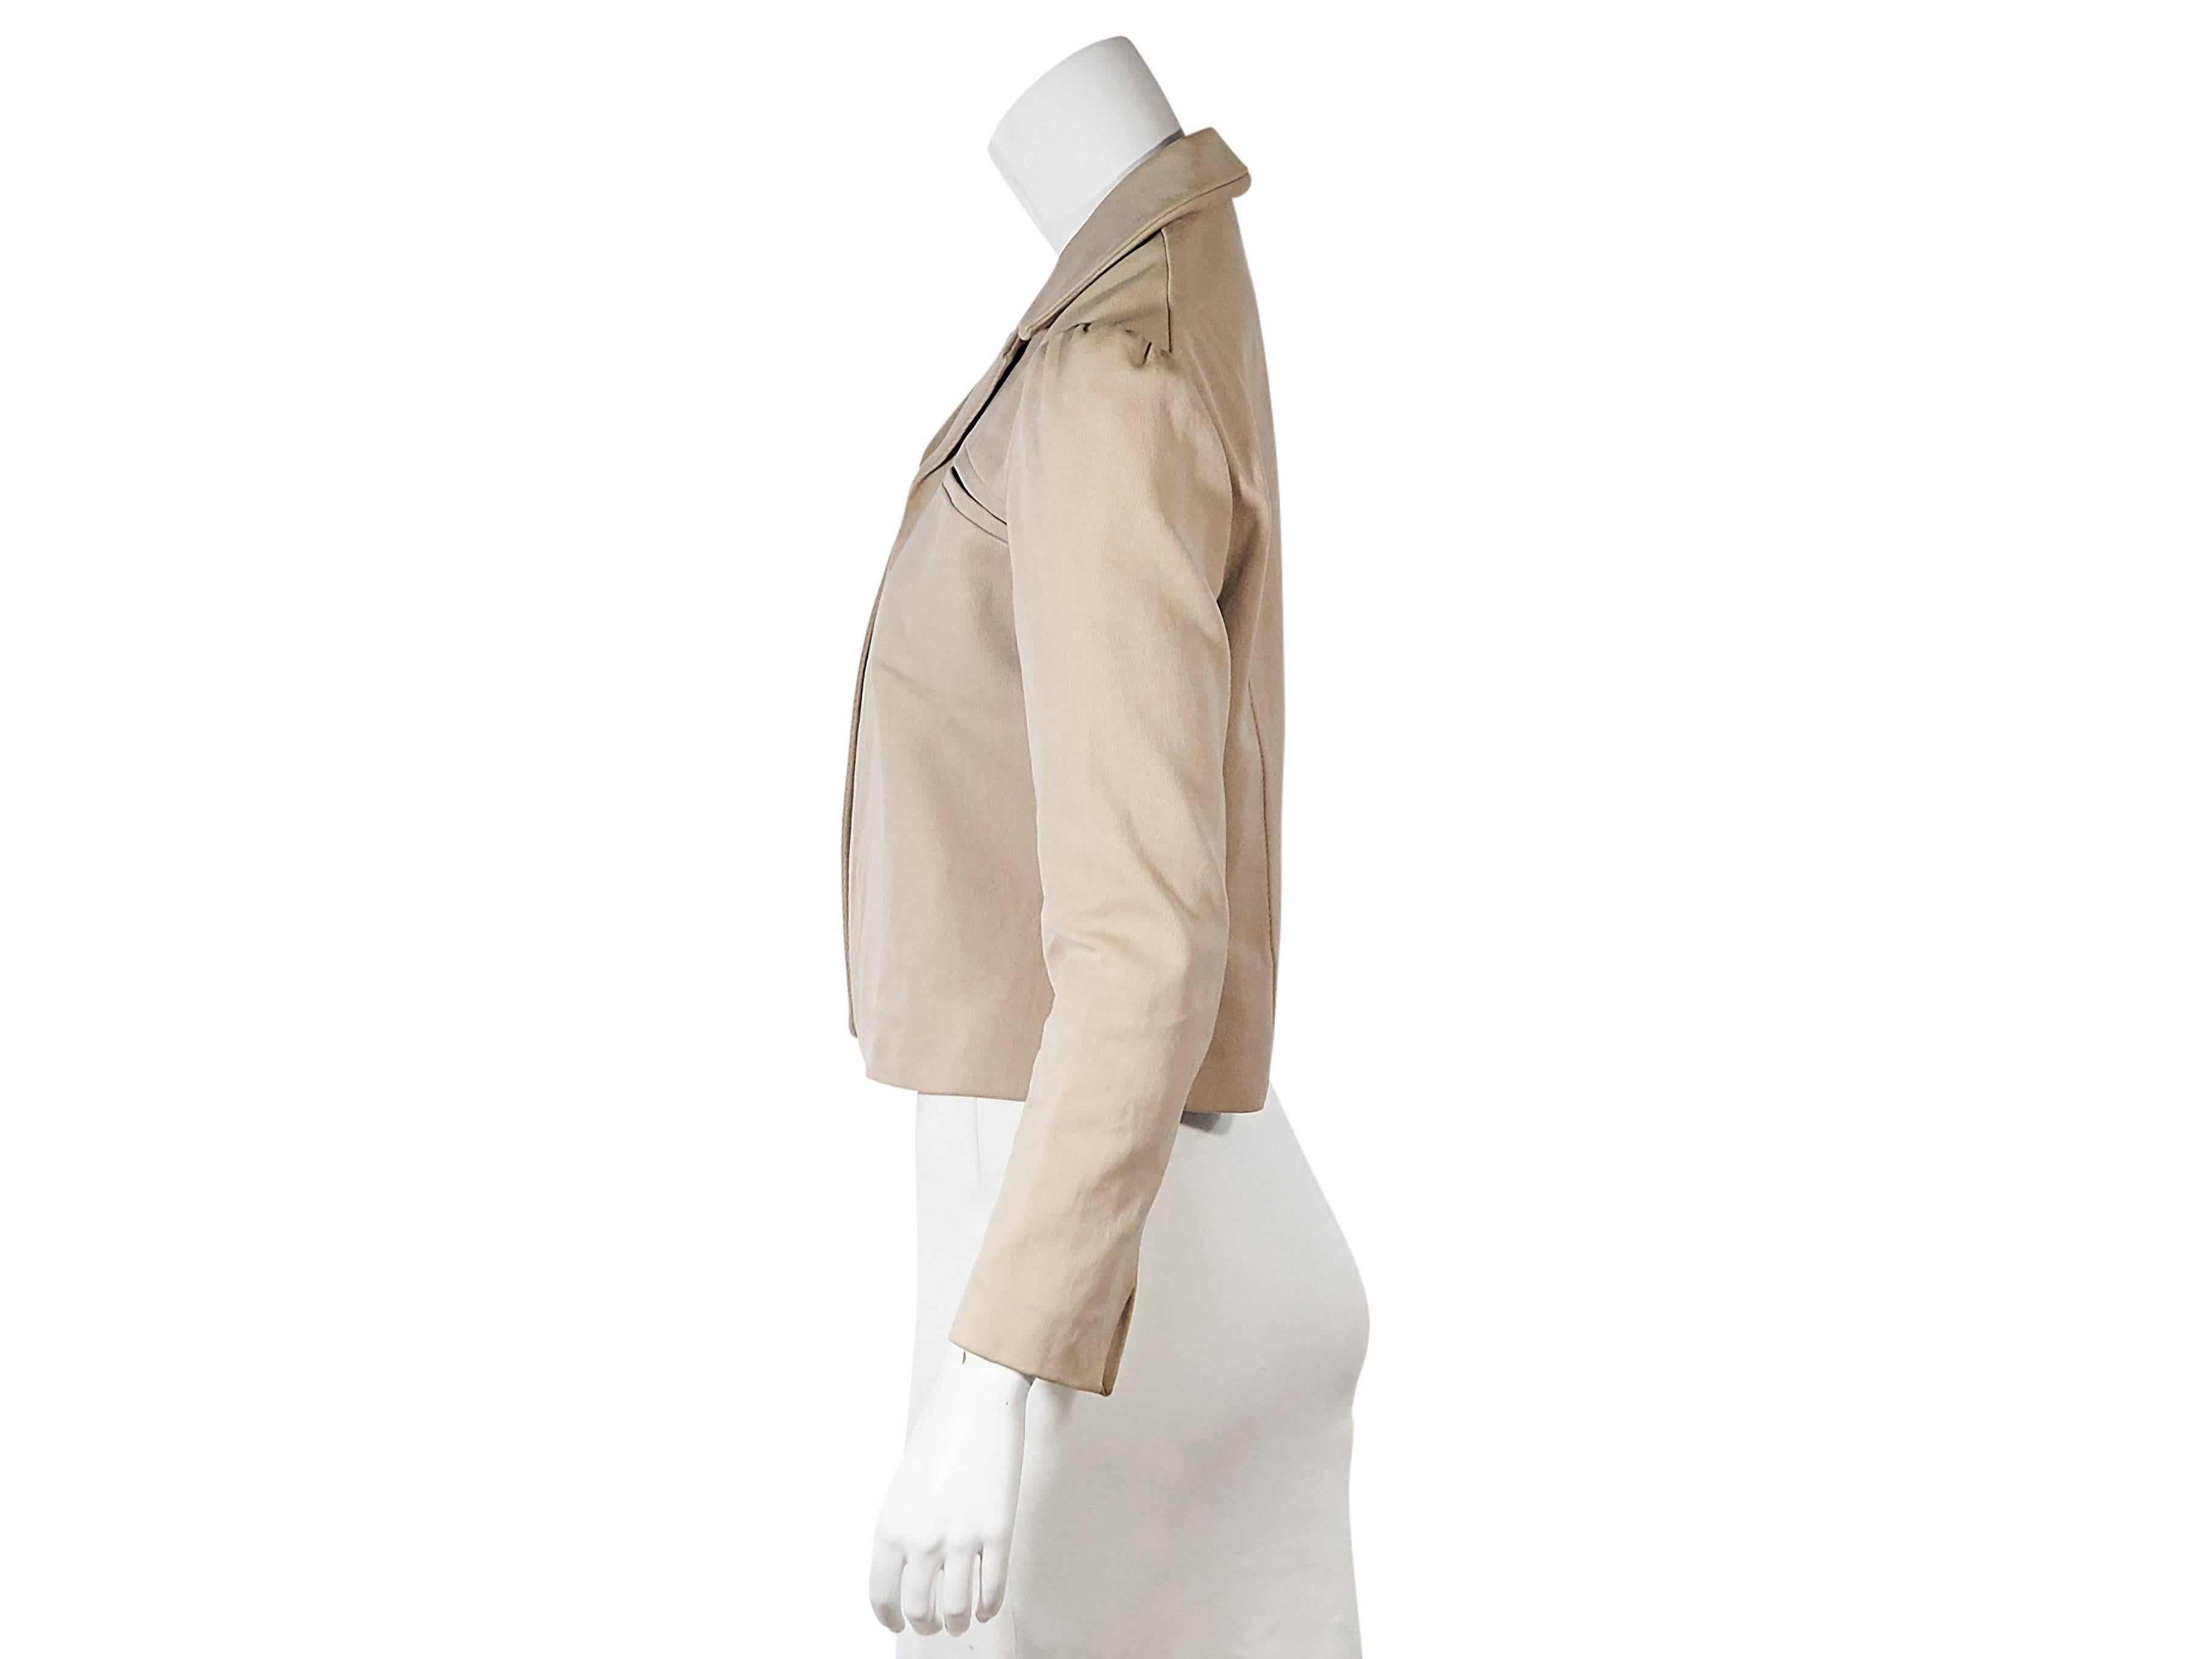 Product details:  Tan jacket by Marni.  Notched collar.  Long sleeves.  Slit cuffs.  Besom chest pocket.  Open front.  
Condition: Very good. 
Est. Retail $ 598.00